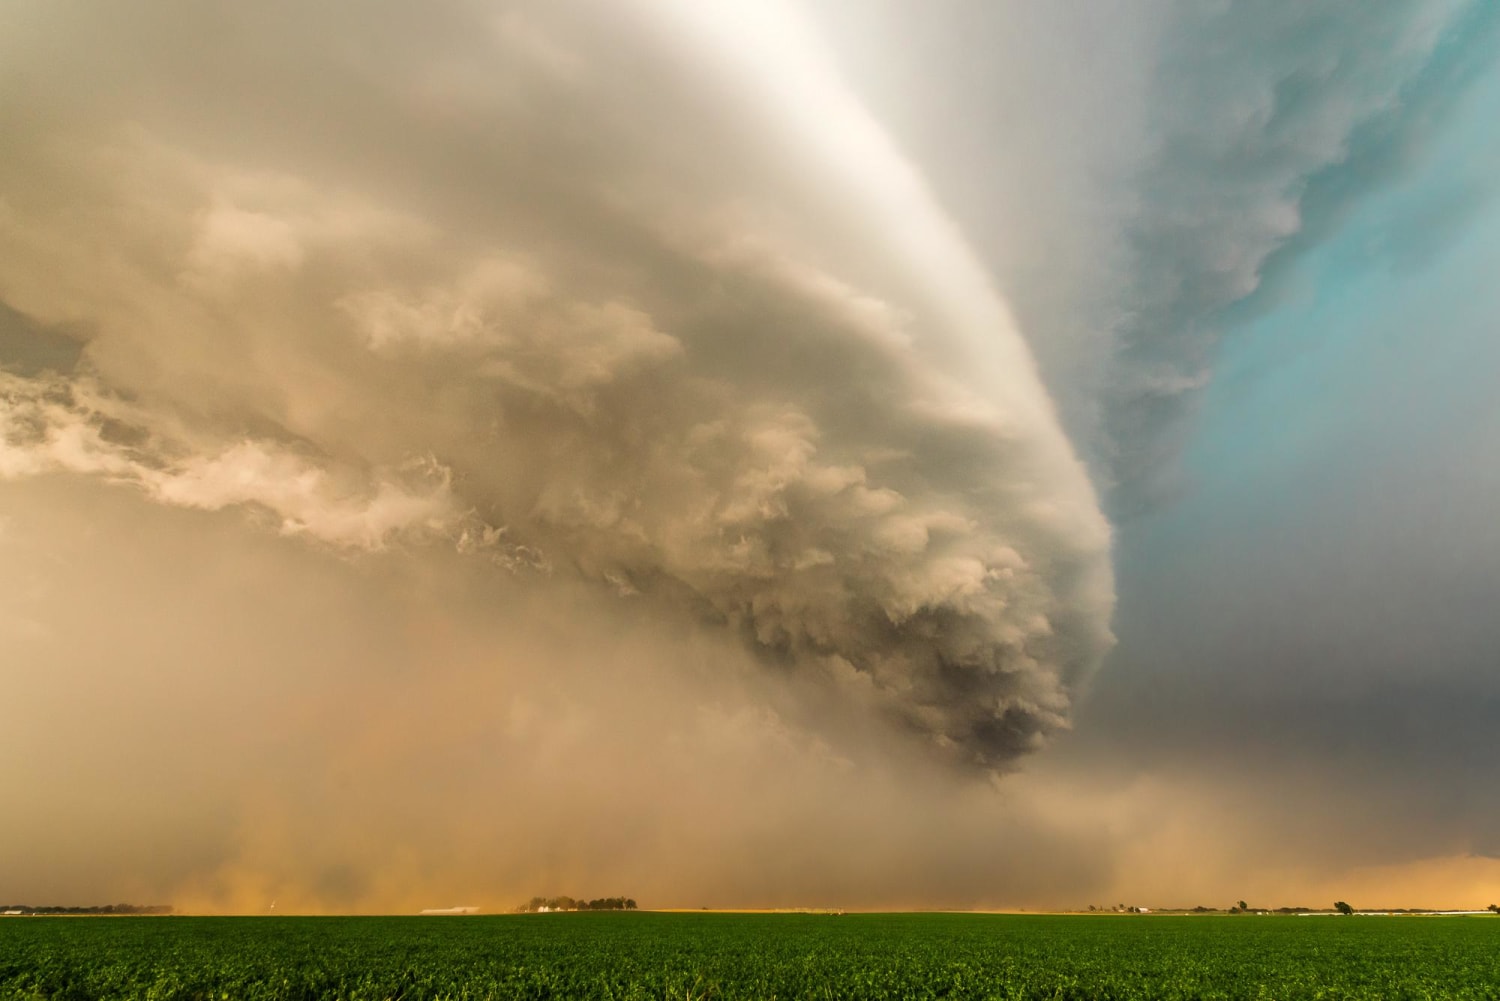 Supercell storm in late afternoon light near Erick, Oklahoma